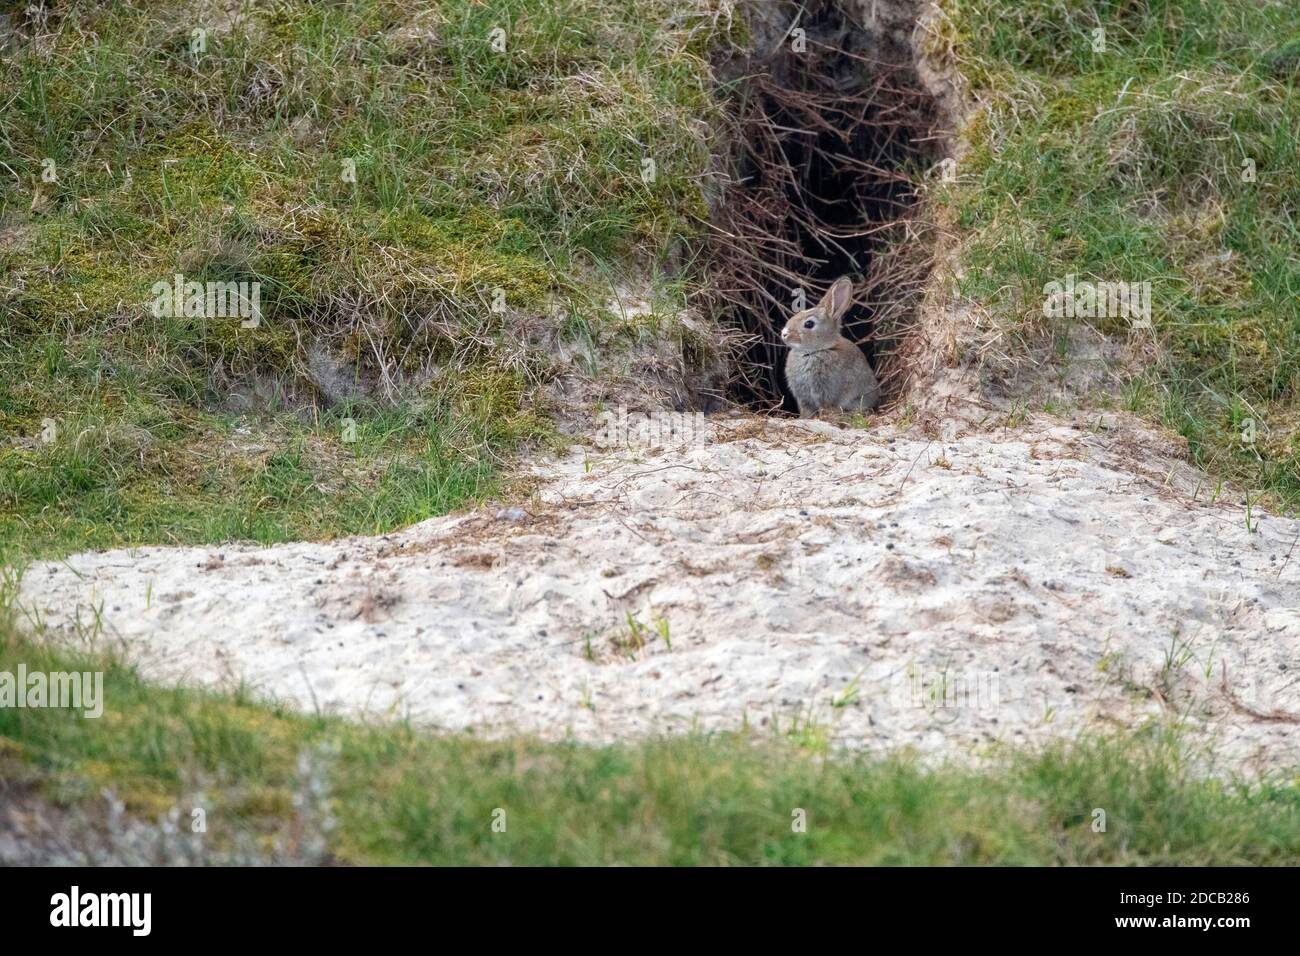 European rabbit (Oryctolagus cuniculus), in front of a rabbit hole in the dunes of Texel, Netherlands, Texel Stock Photo